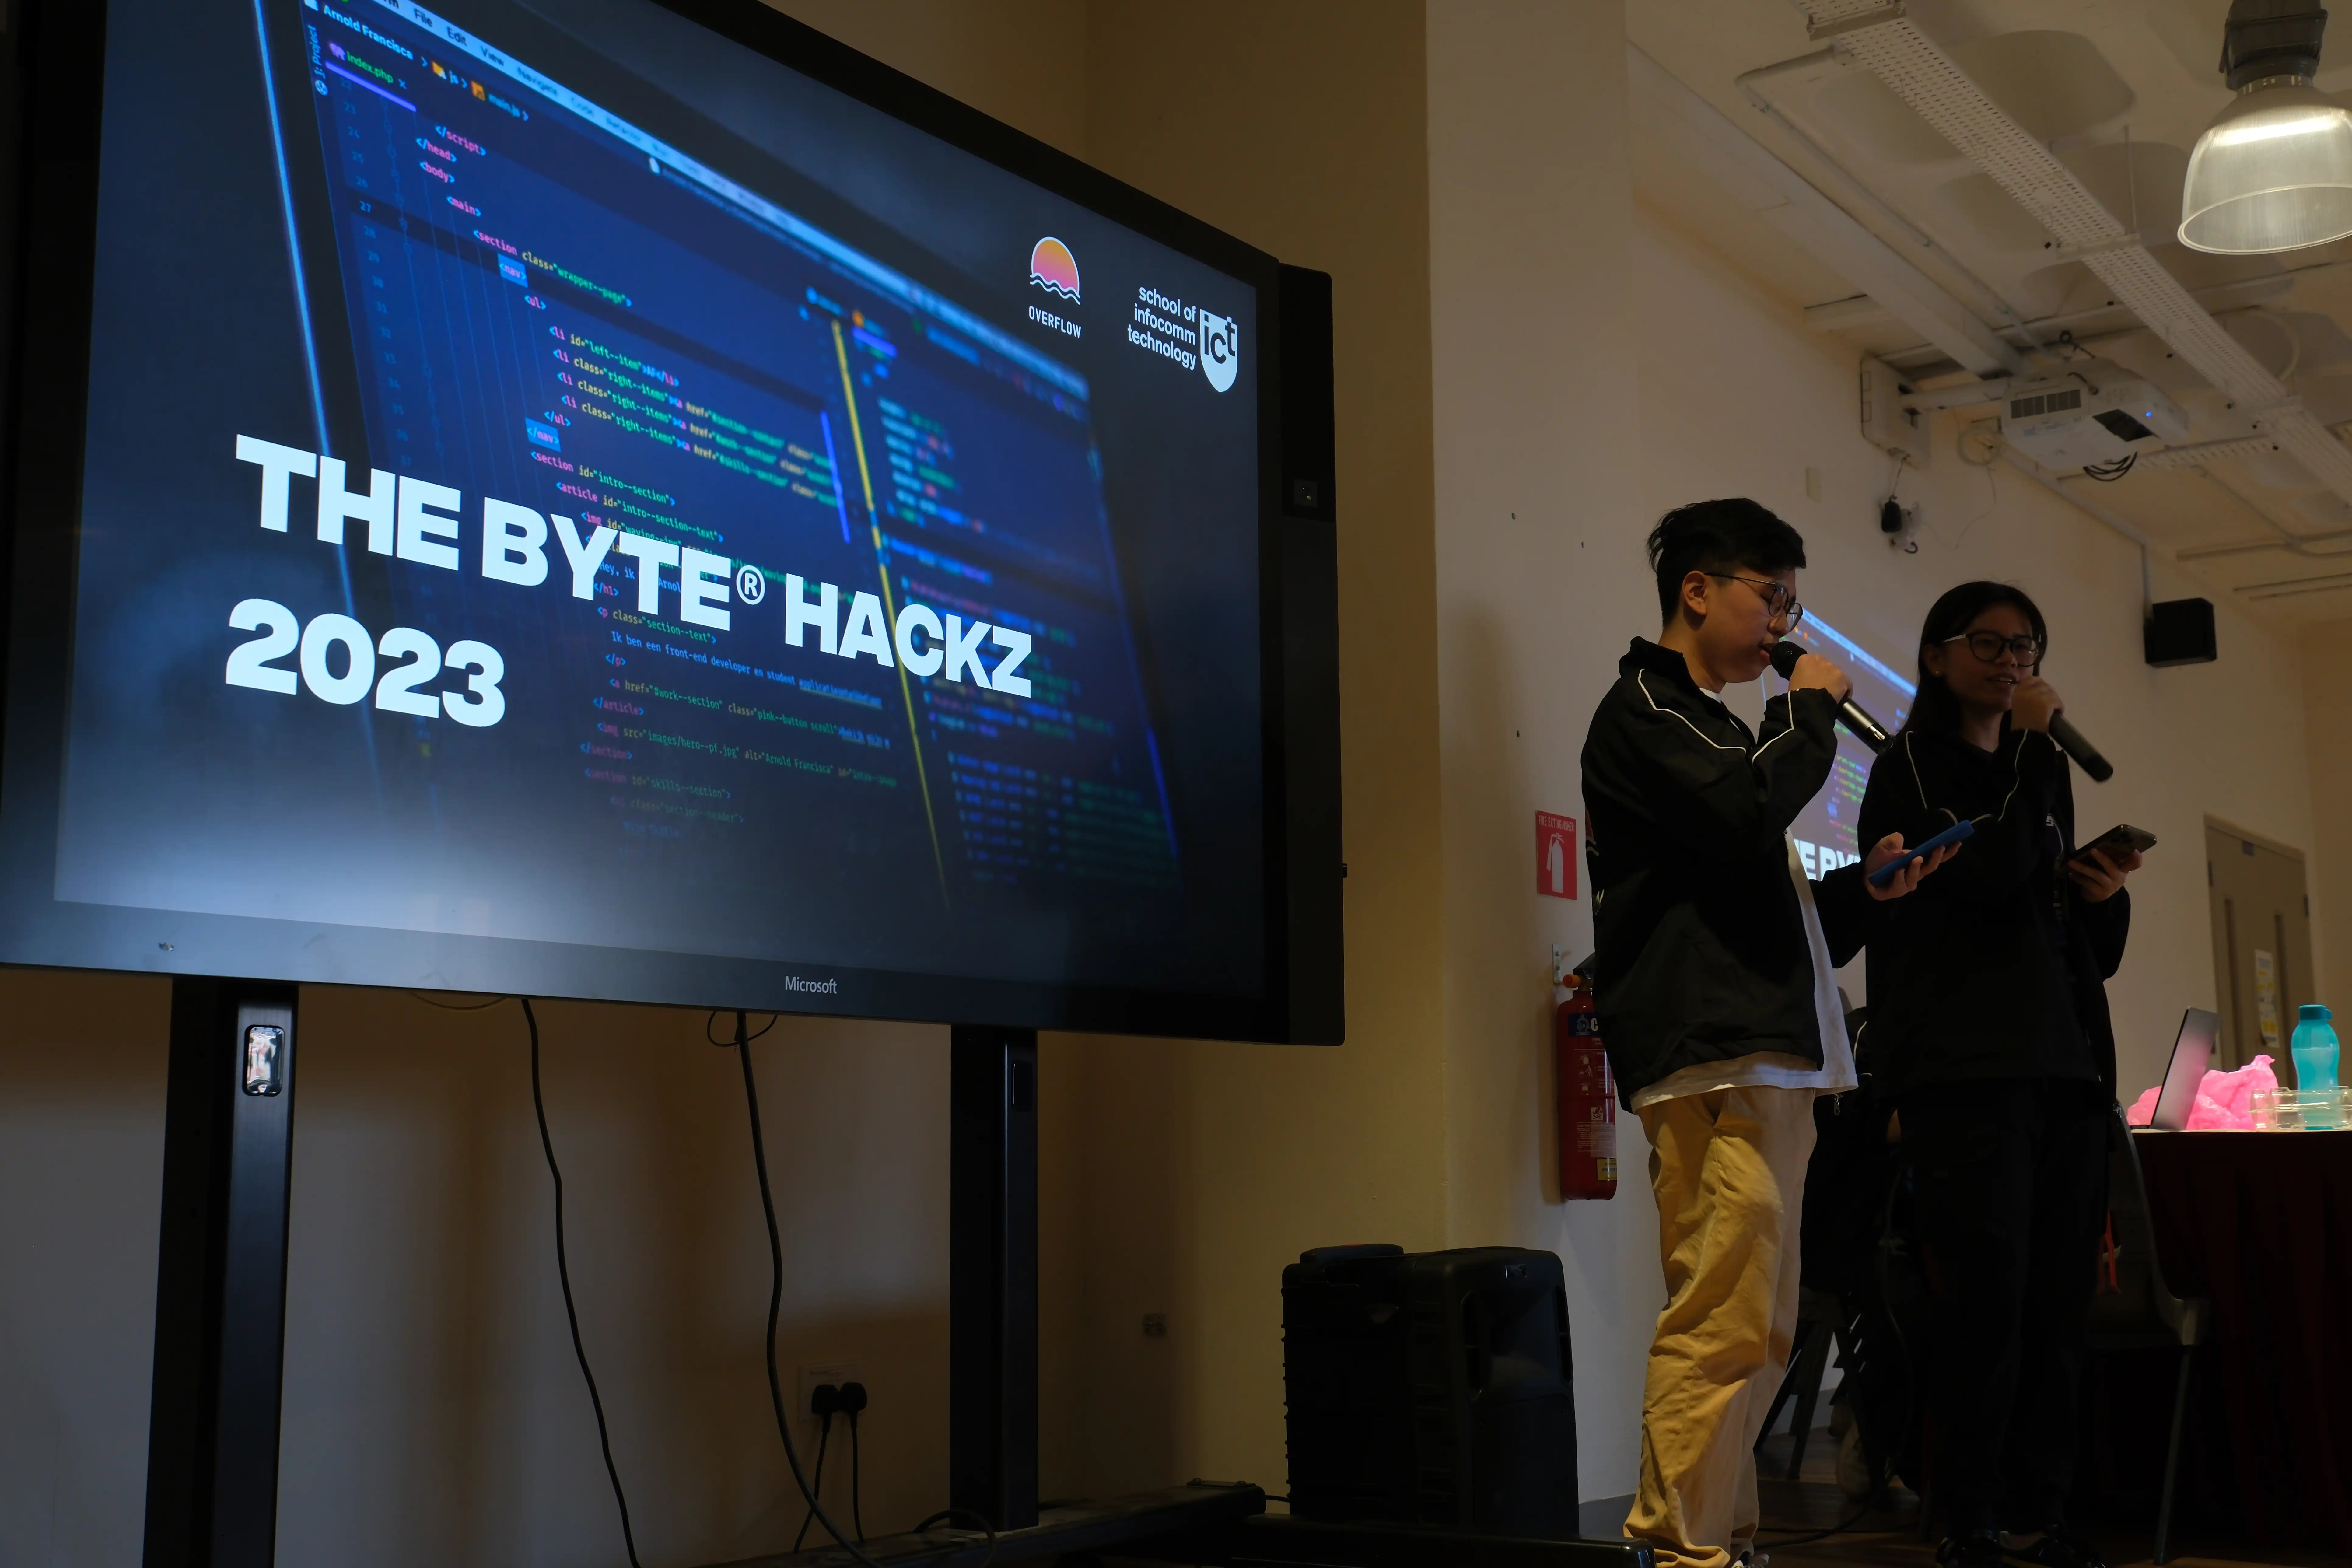 A large screen with the words "The Byte® Hackz 2023" on it, with two speakers to the right.